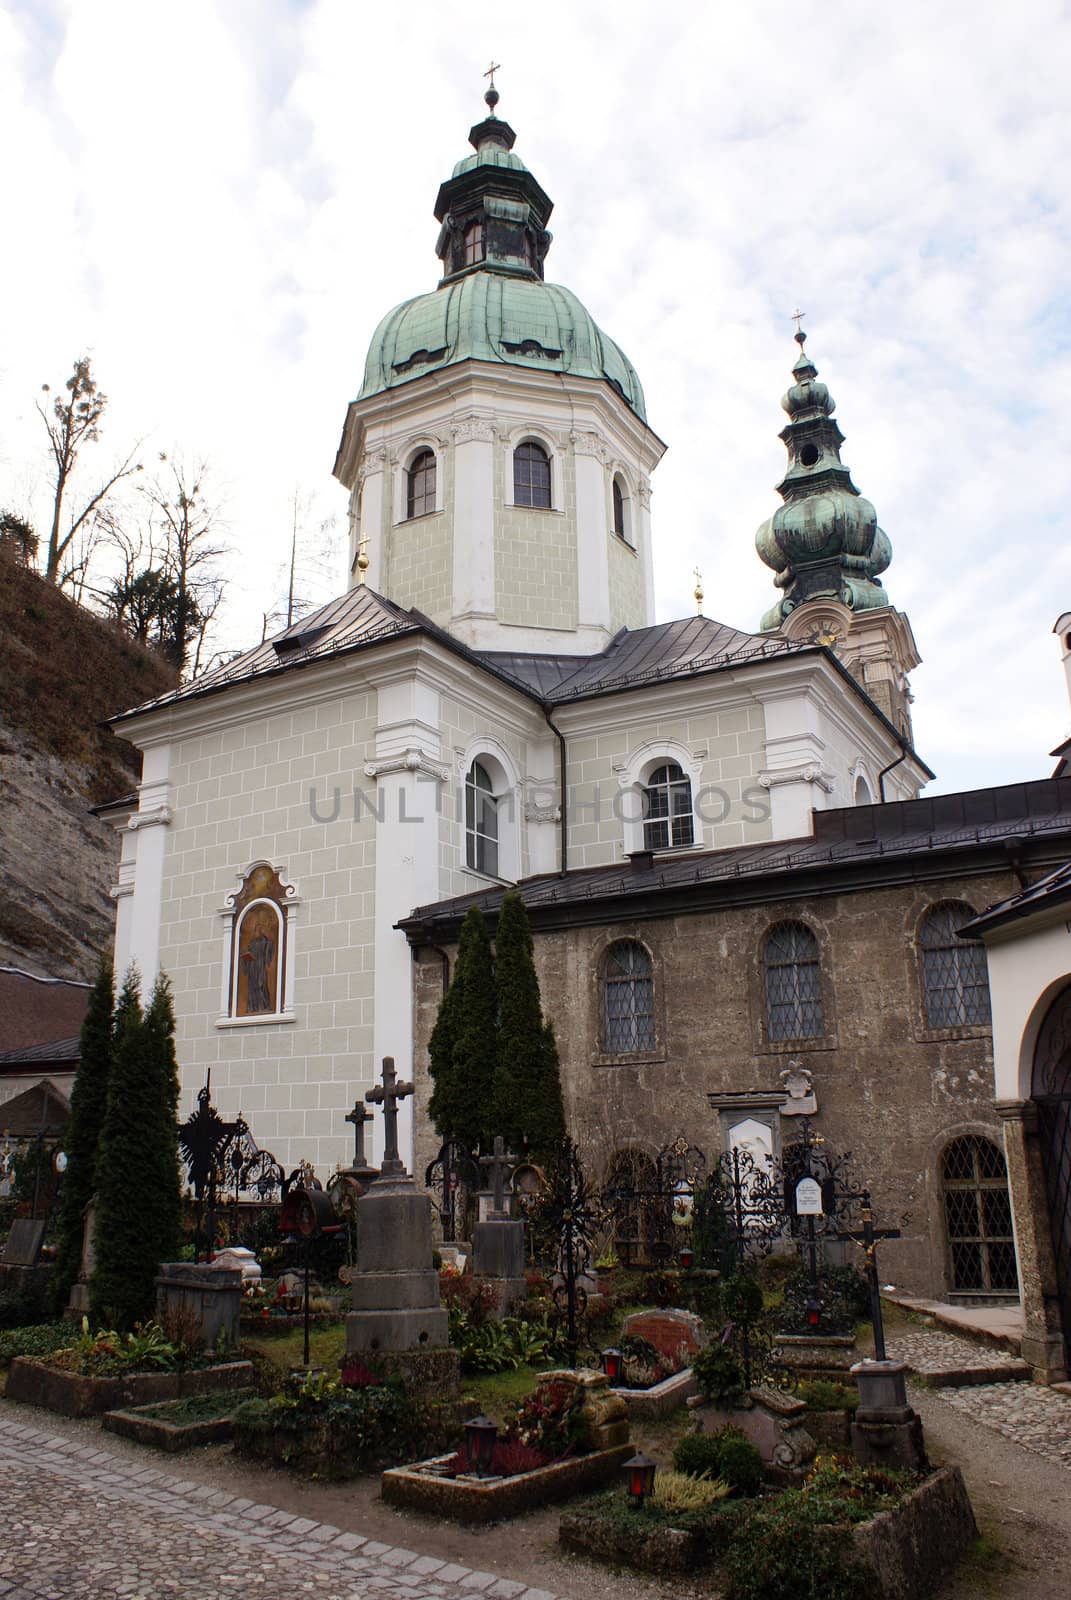 Cemetry In Salzburg by calexica